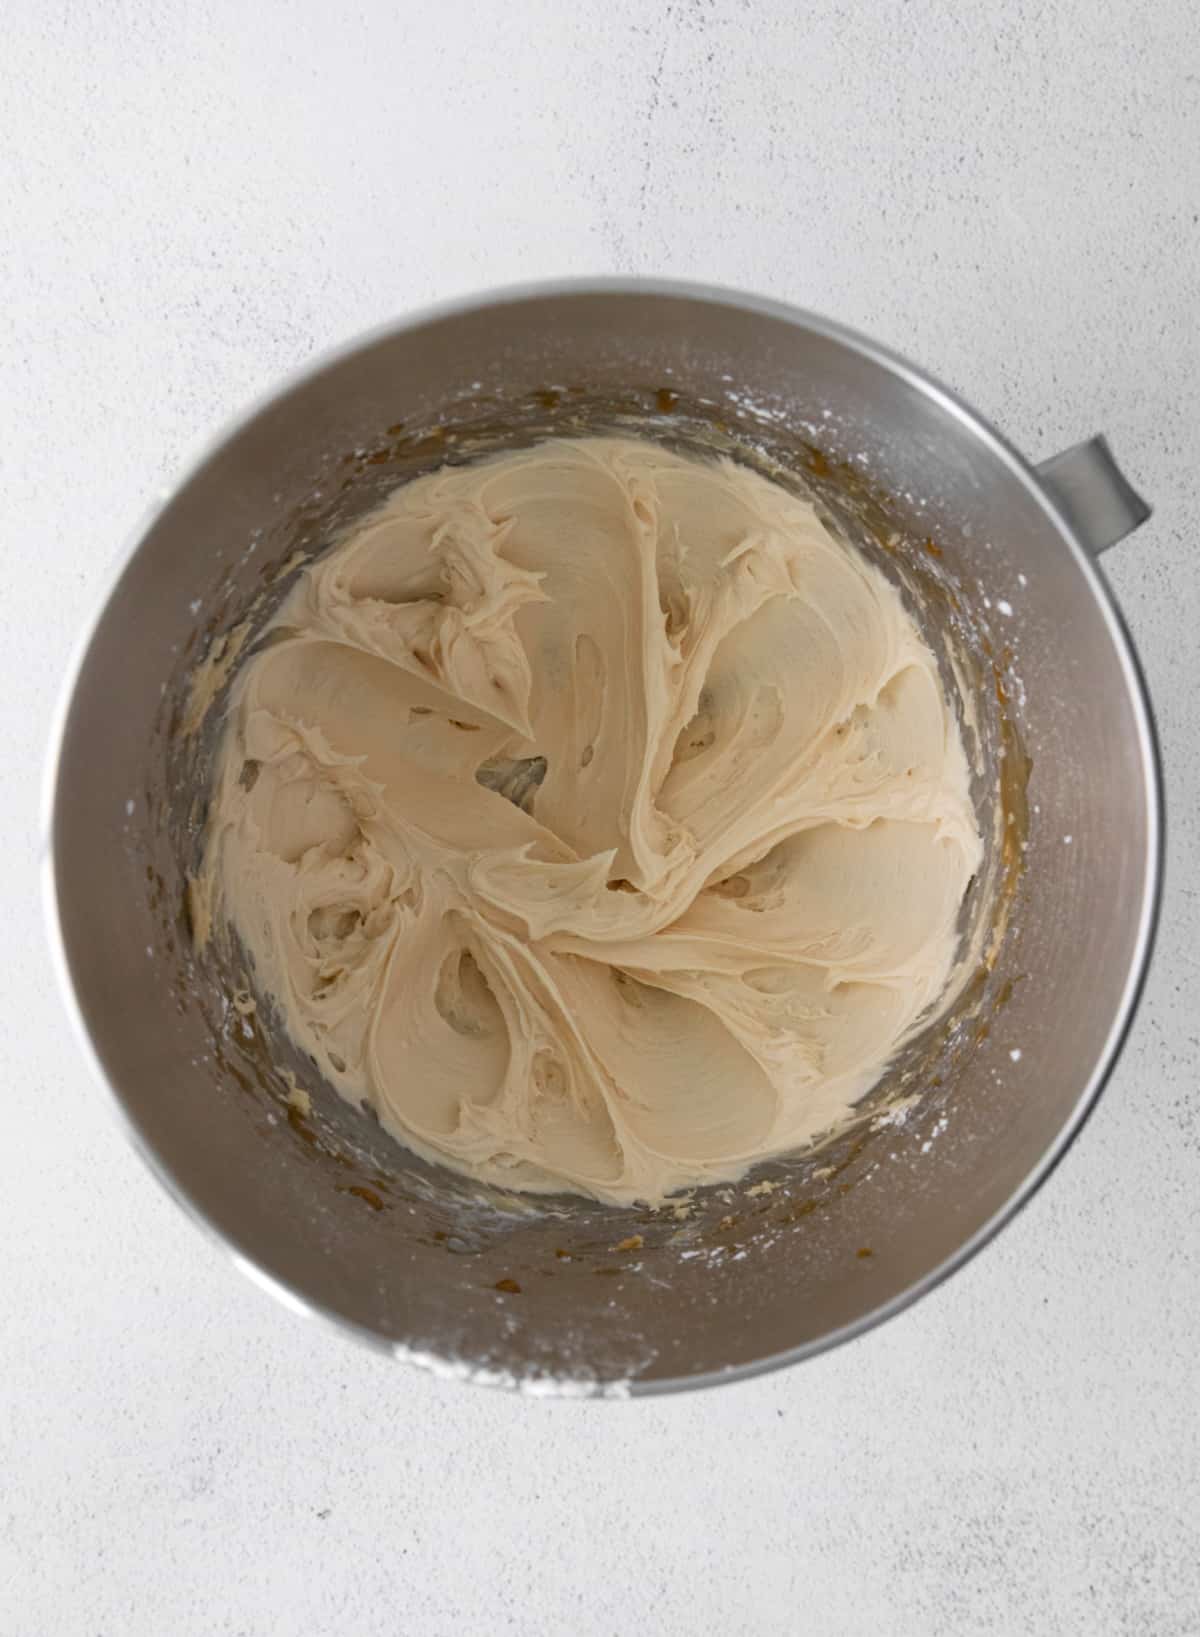 cupcake batter in a mixing bowl